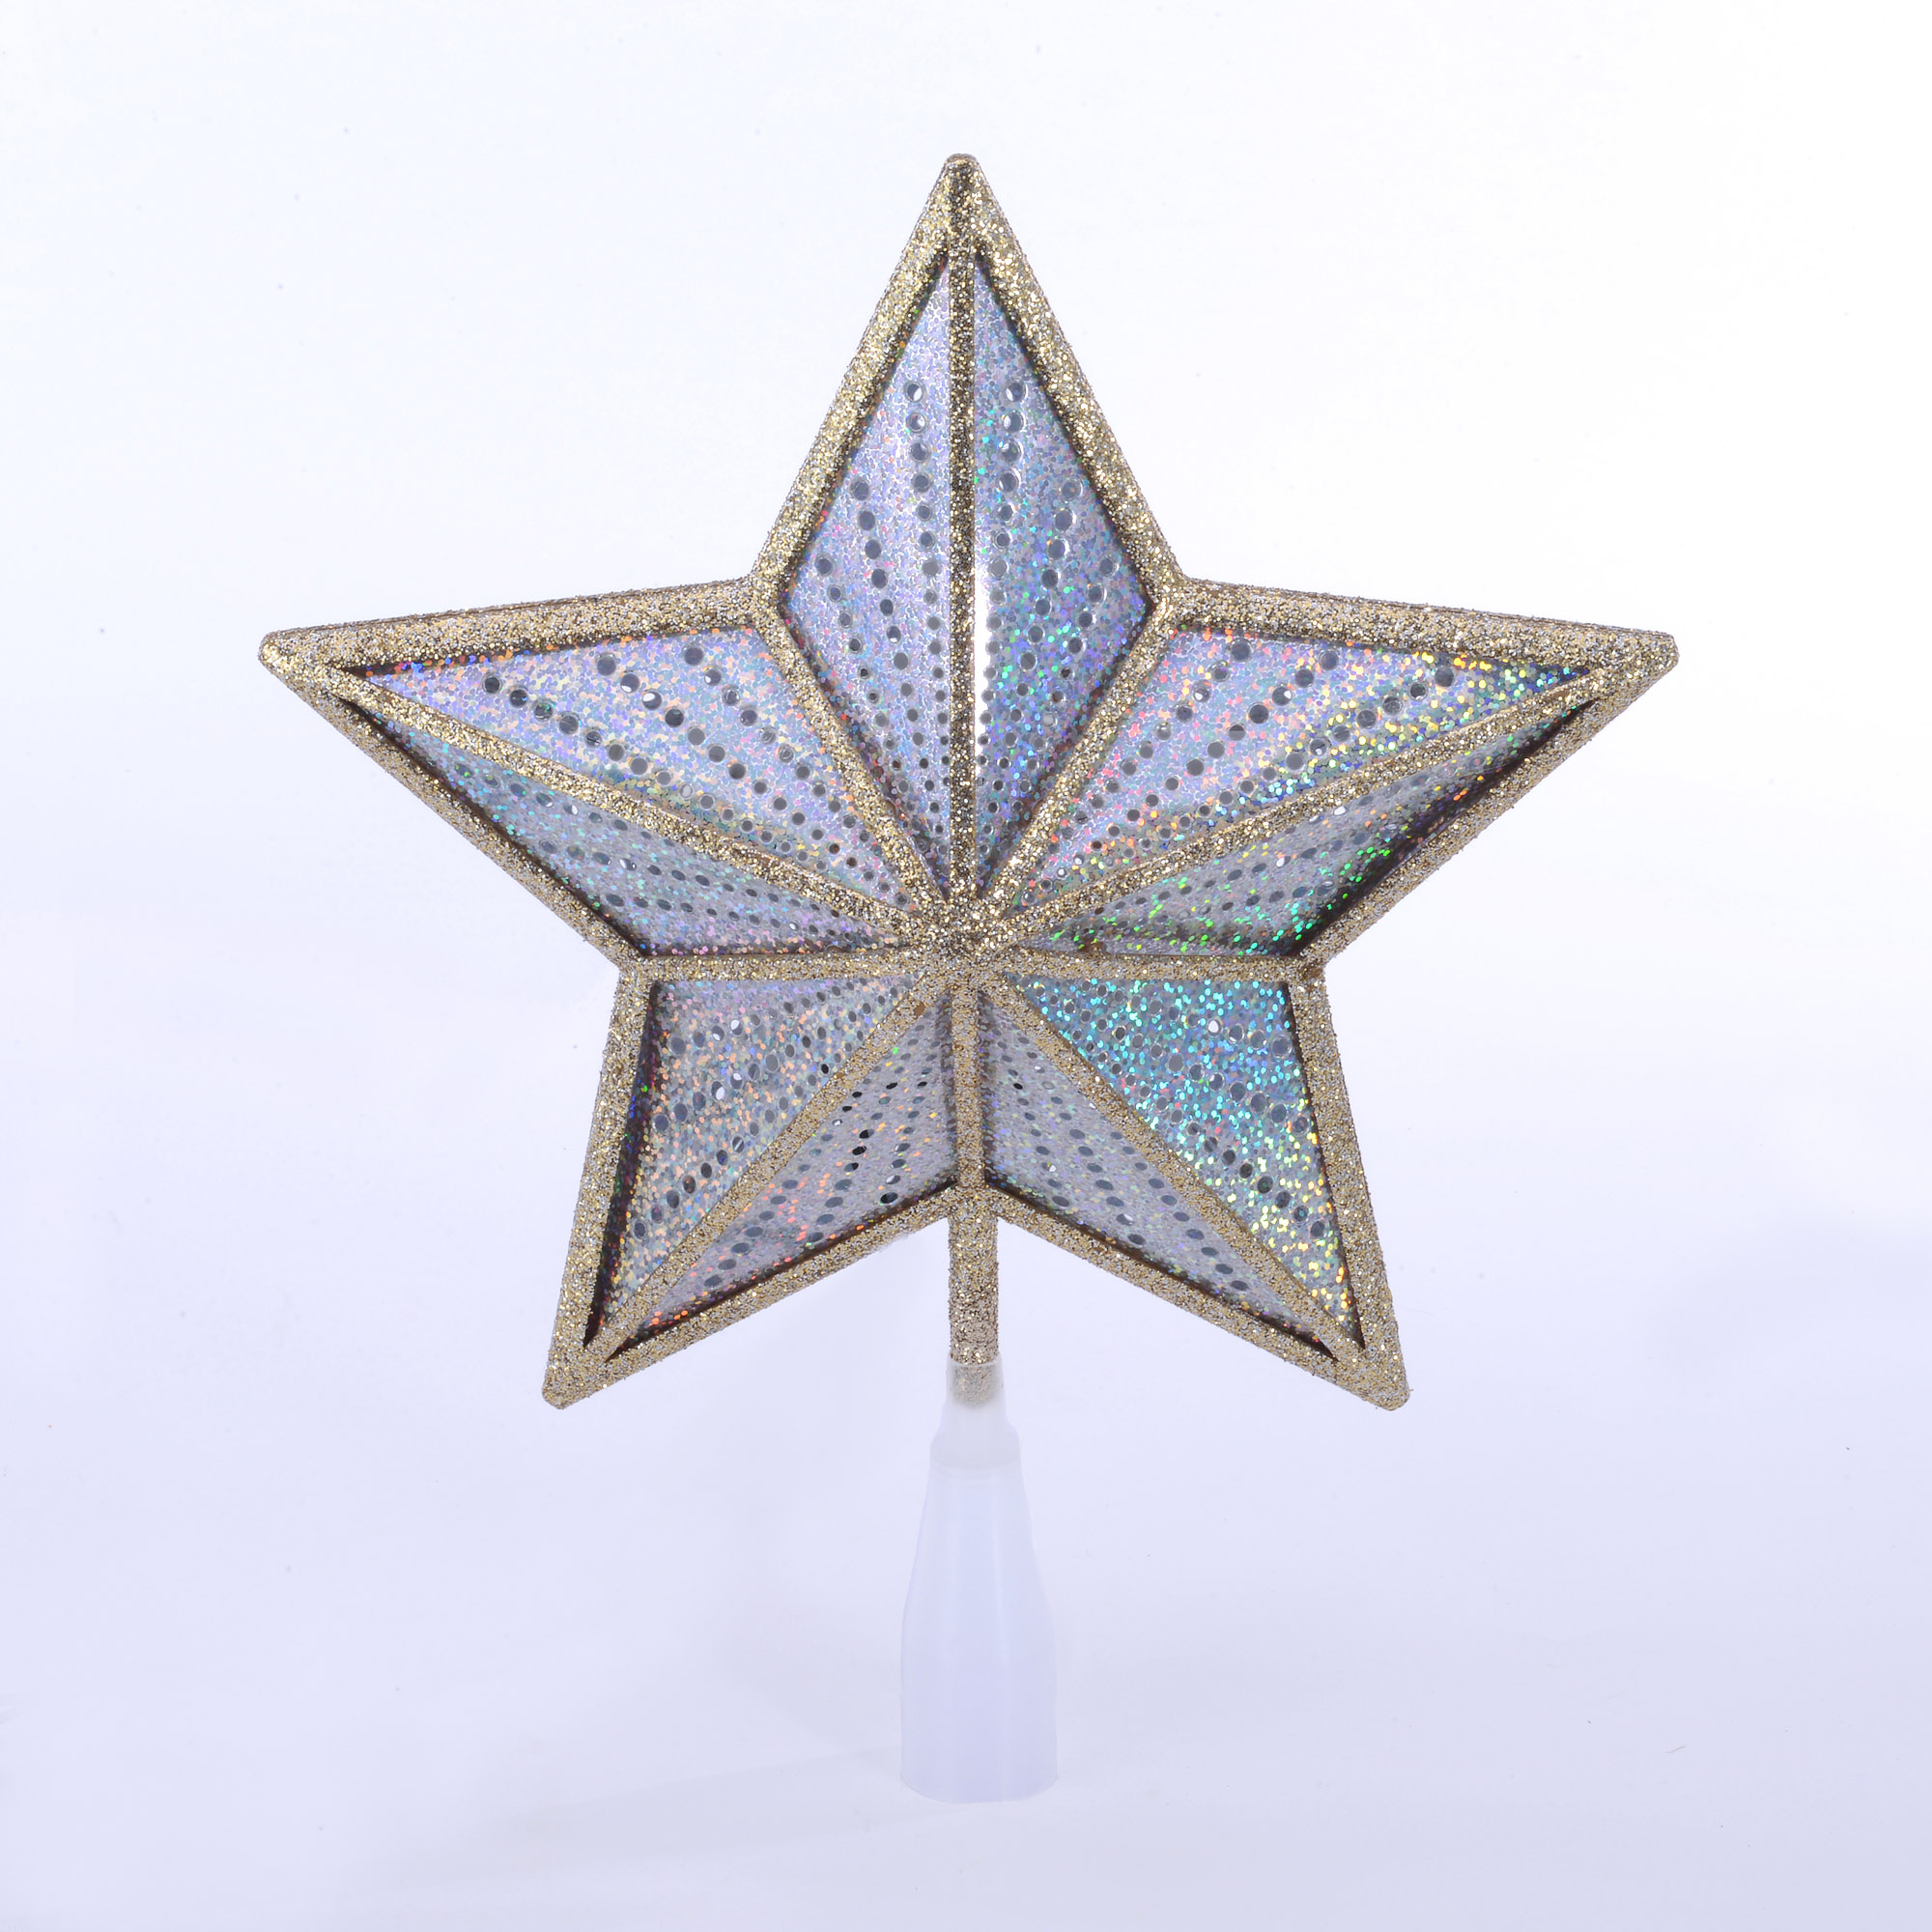 Holiday Time 12 inch Champagne Gold Star Tree Topper - image 3 of 5